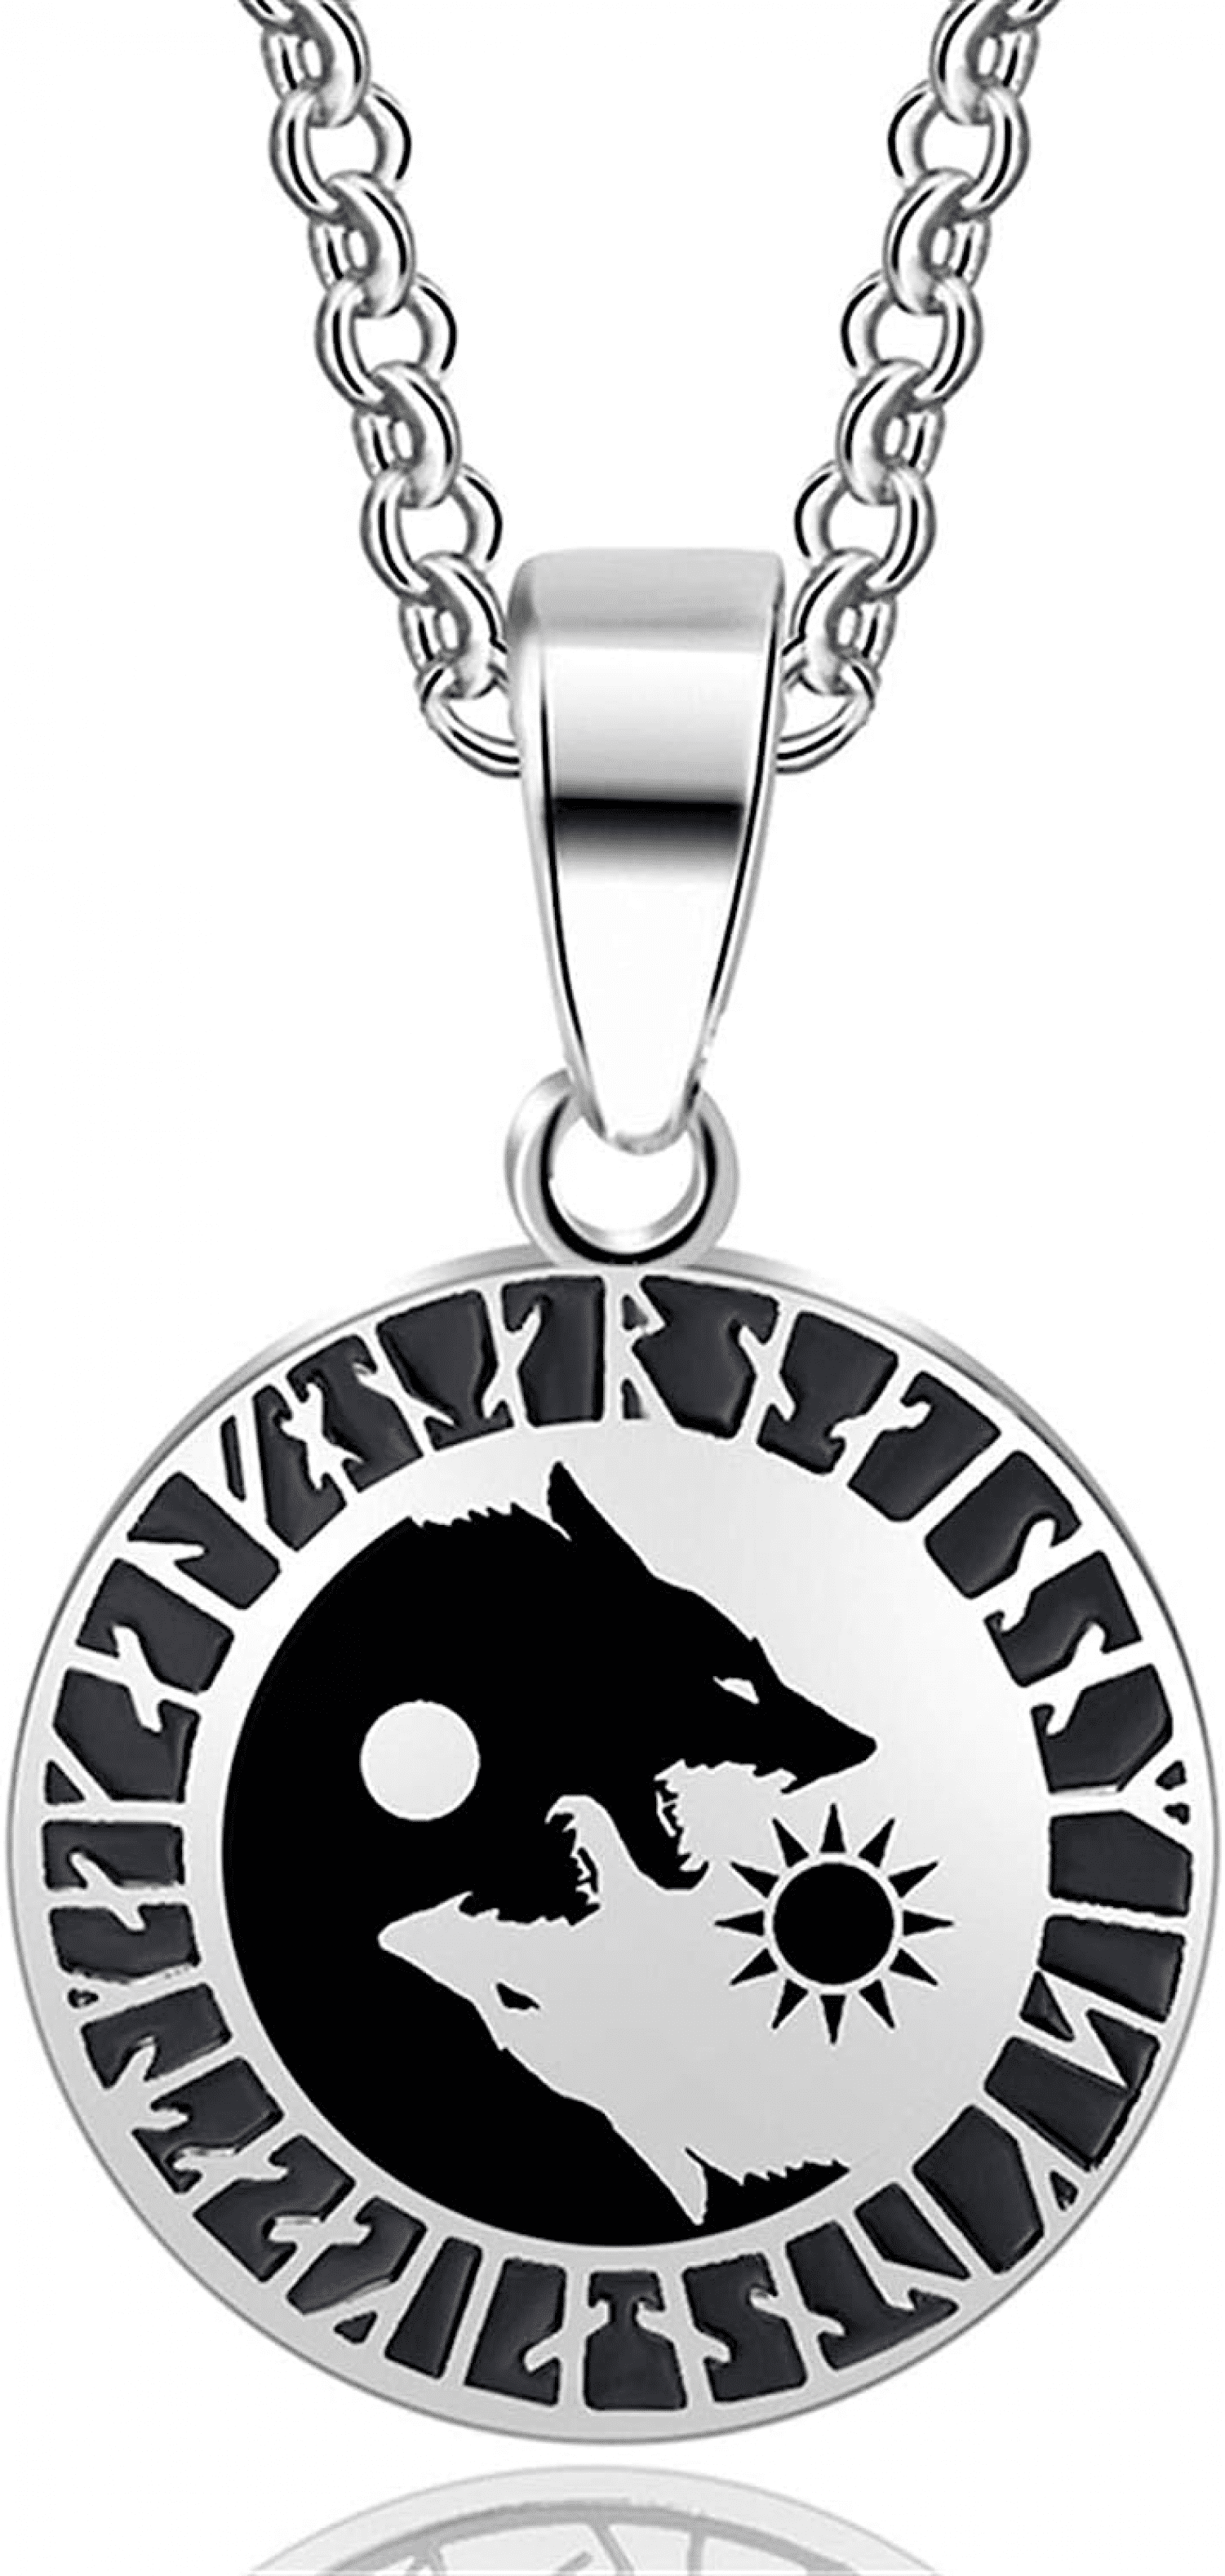 Starchenie Wolf Necklace for Women Men Sterling Silver Howling Pendant 商品を価格比較 